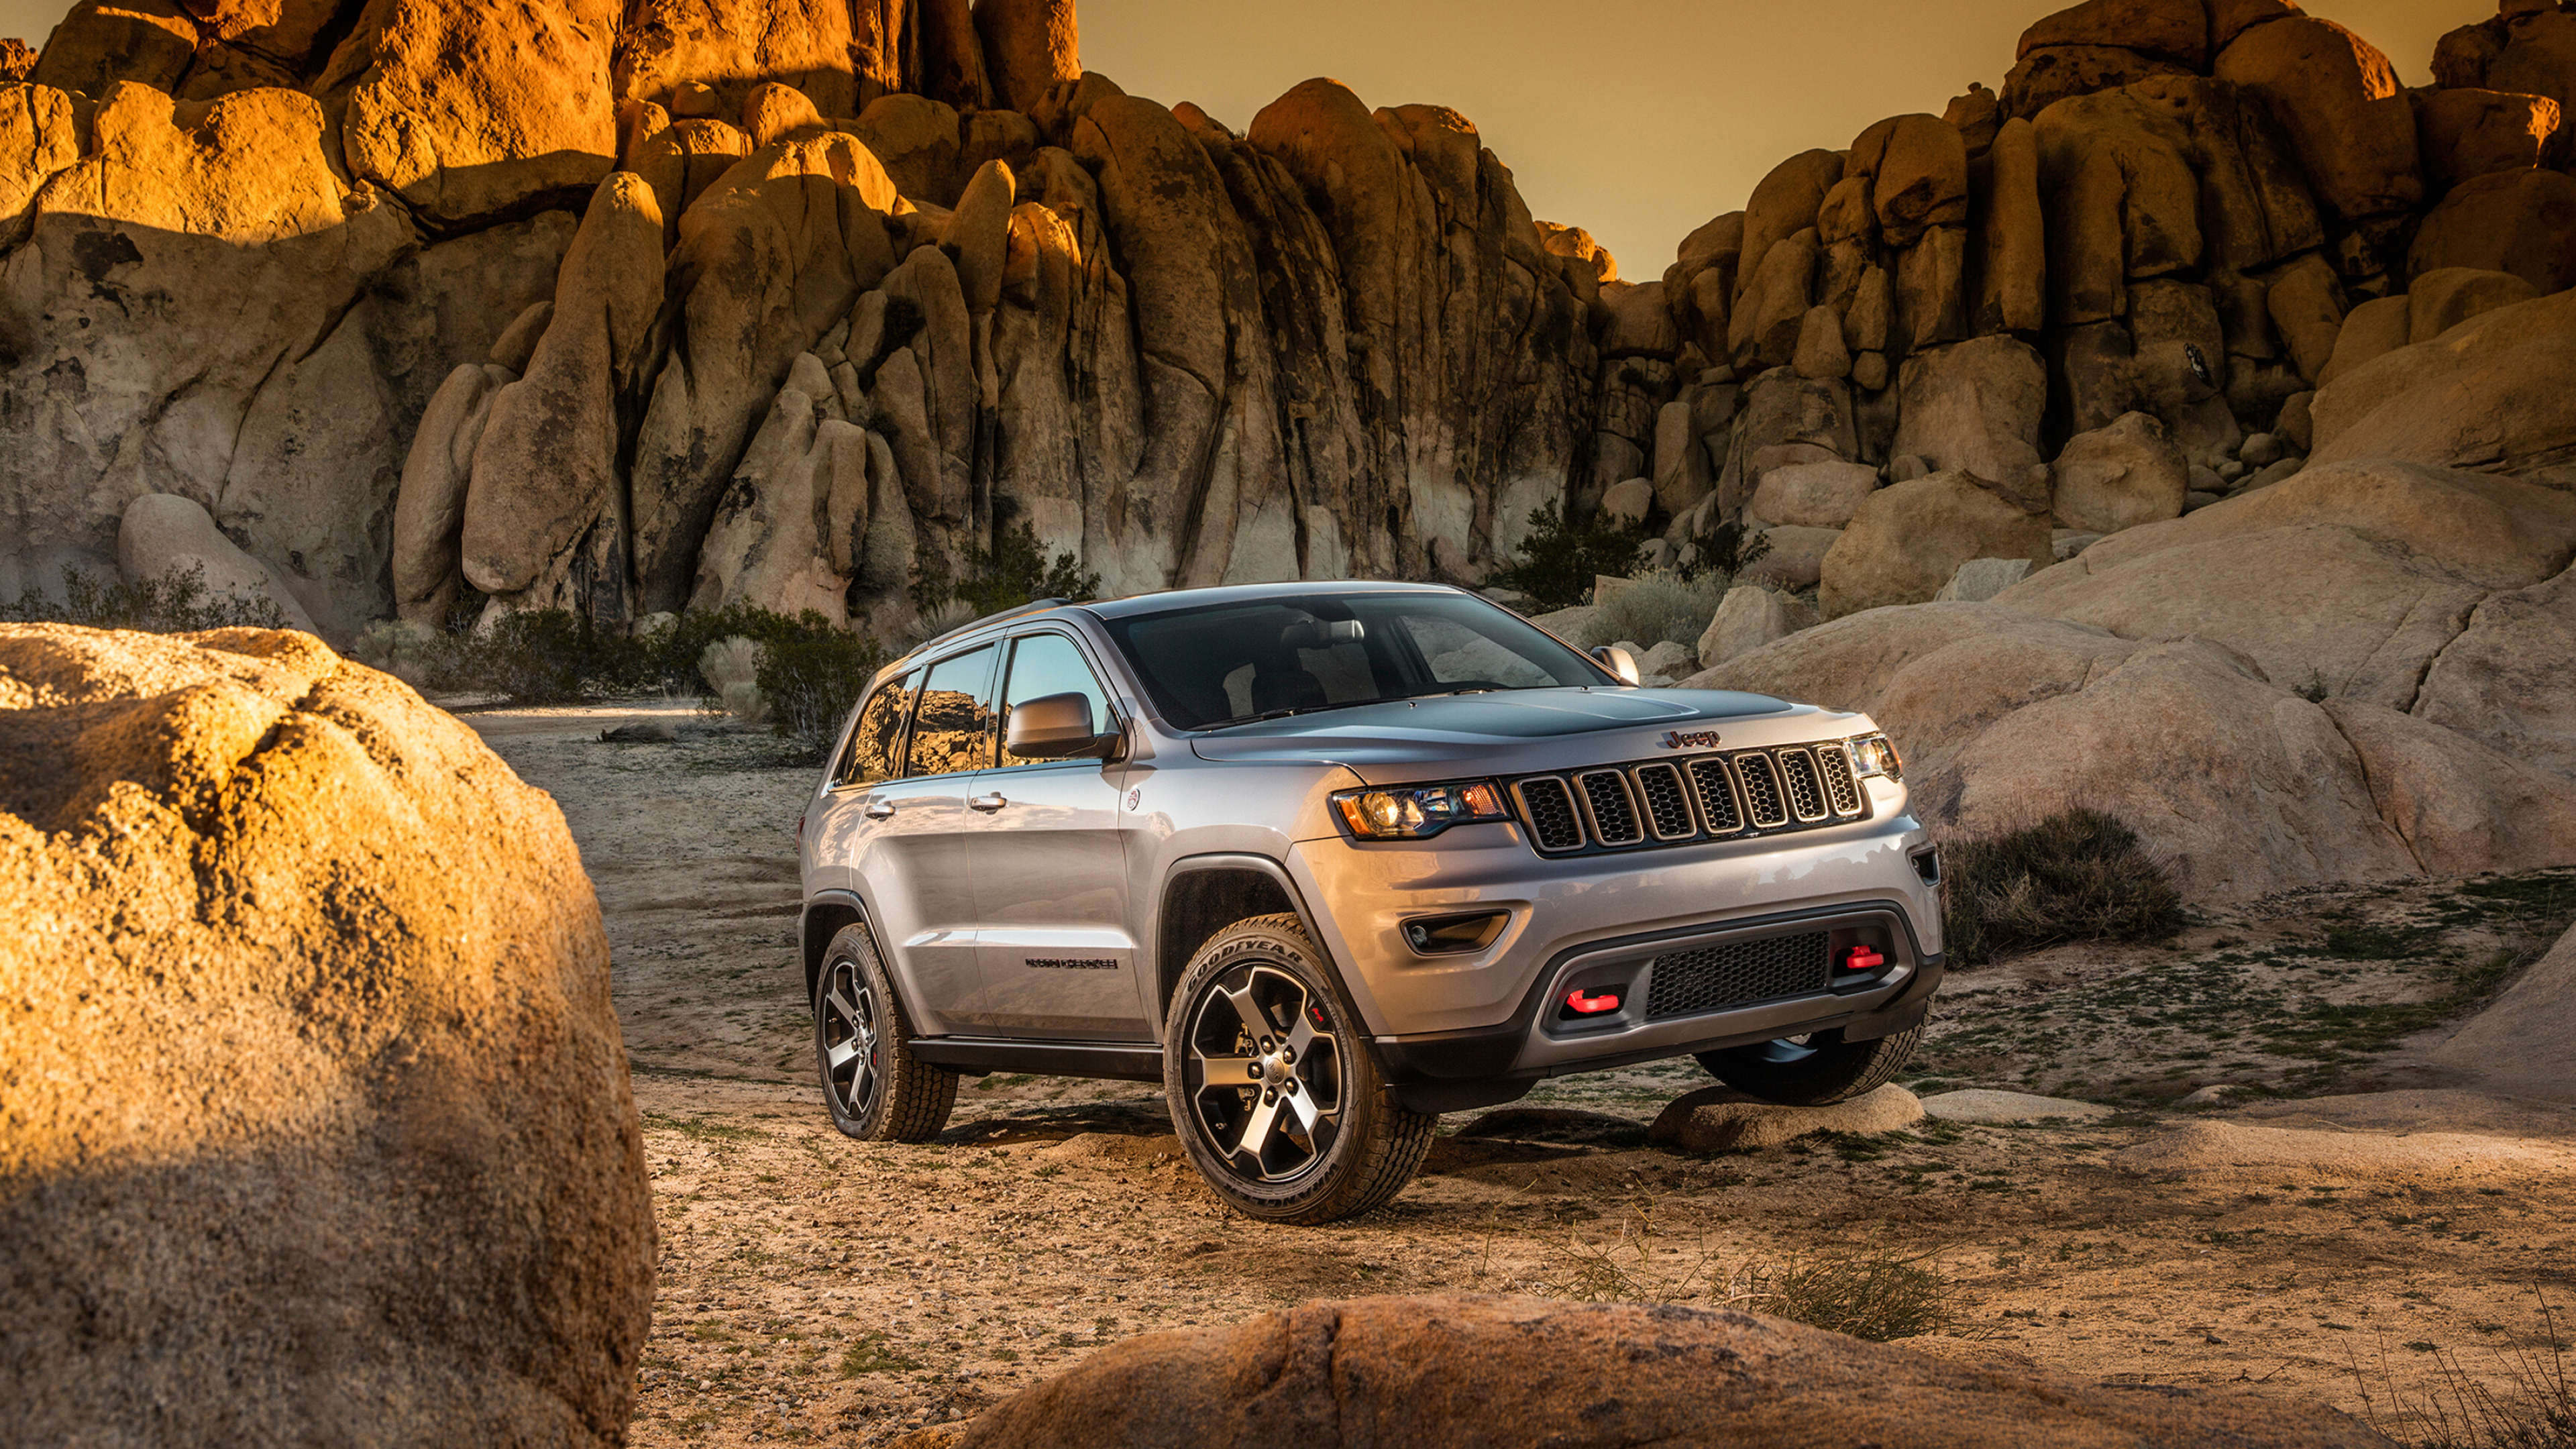 Jeep Grand Cherokee: A mid-size SUV produced by the American manufacturer. 3840x2160 4K Background.